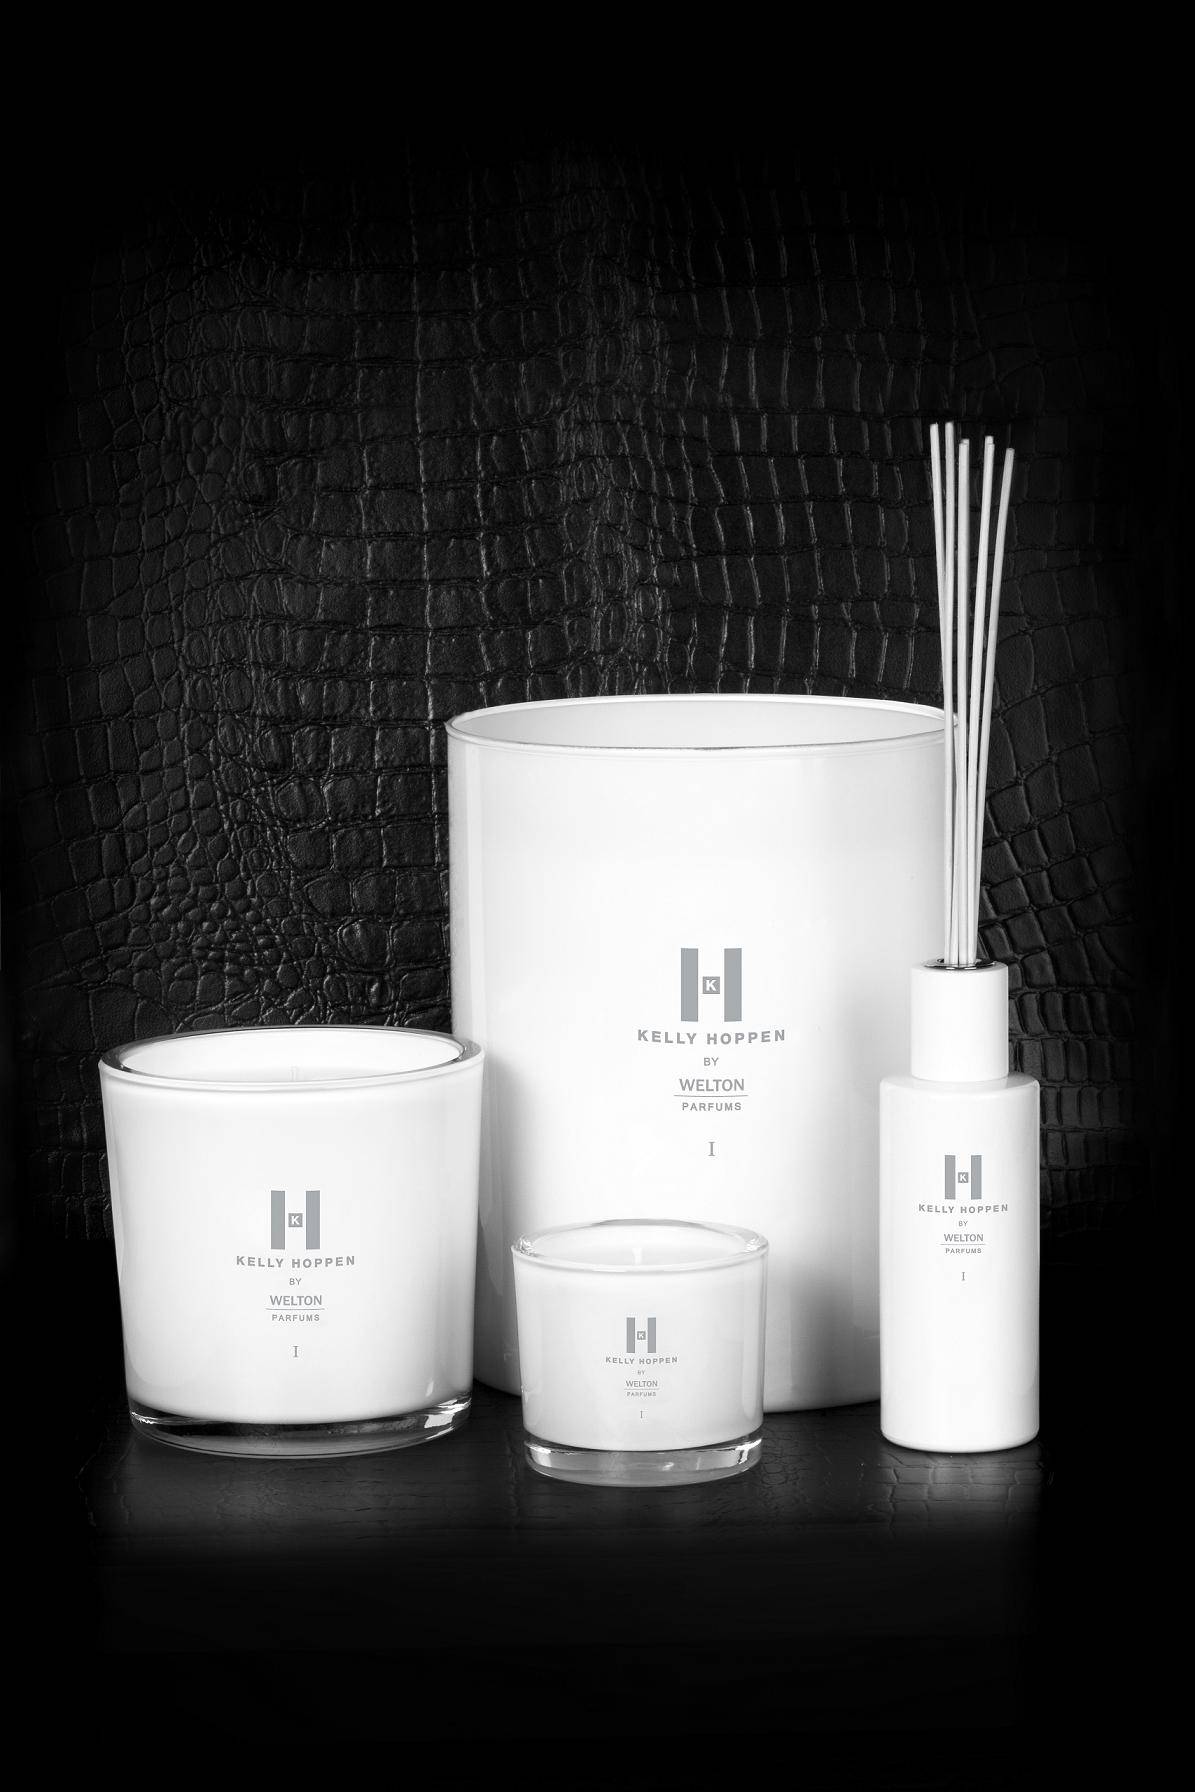 Kelly Hoppen by Welton London home fragrances collection. Limited Edition in 2010 with the famous interior designer